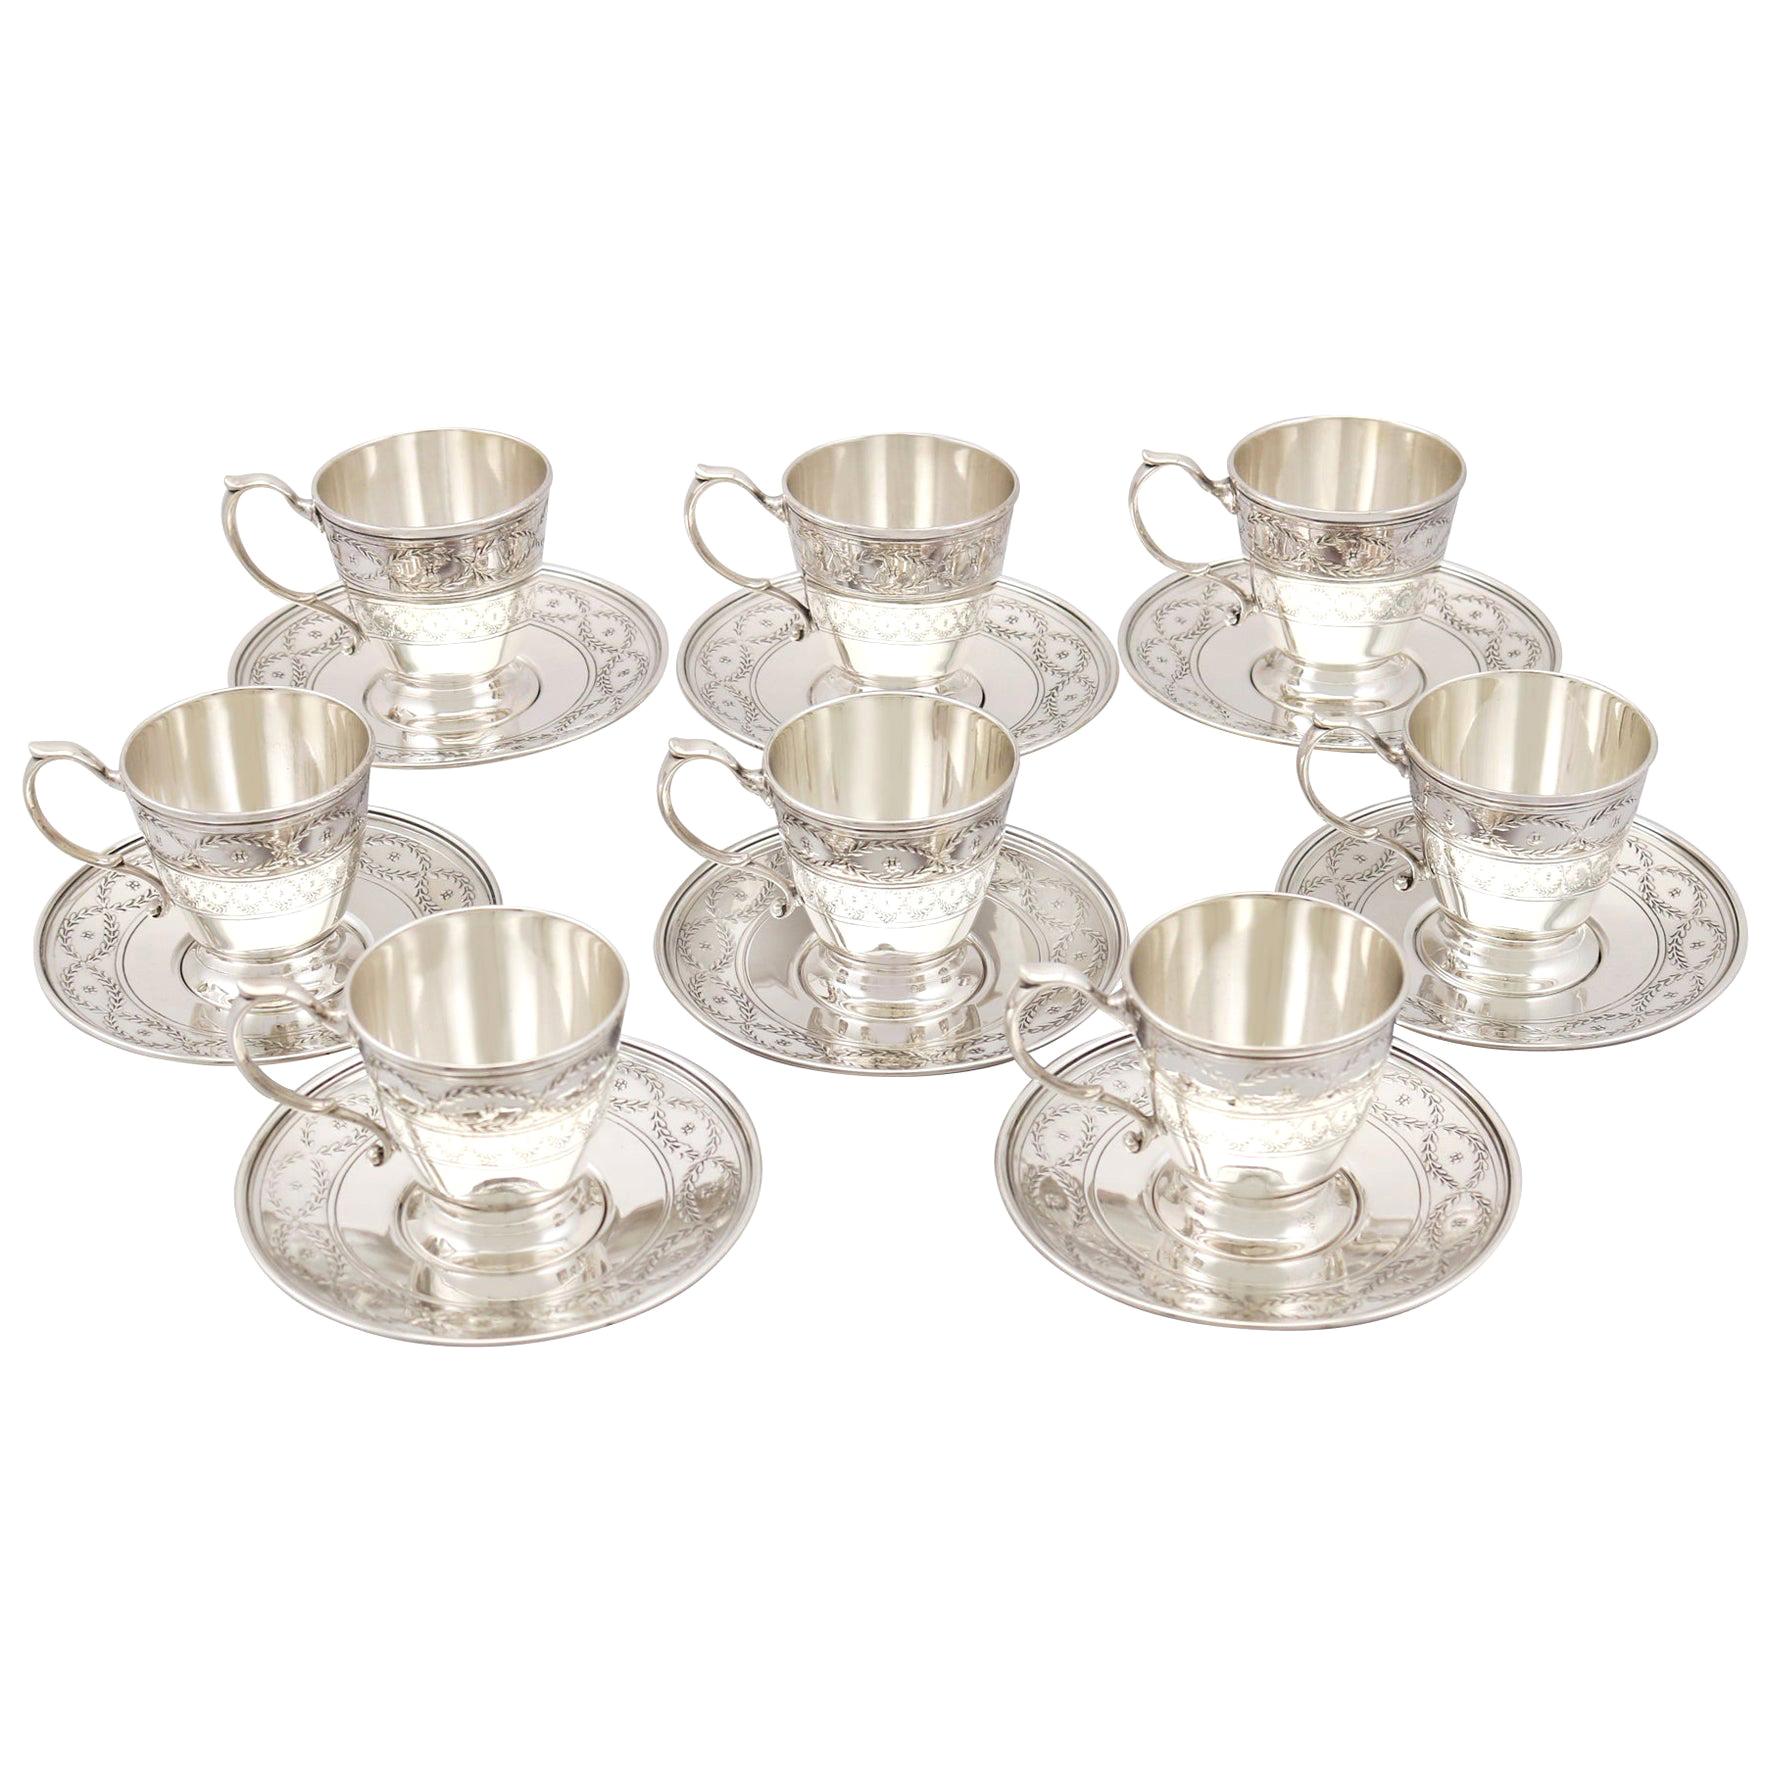 Antique American Sterling Silver Cups and Saucers Set by Tiffany & Co.